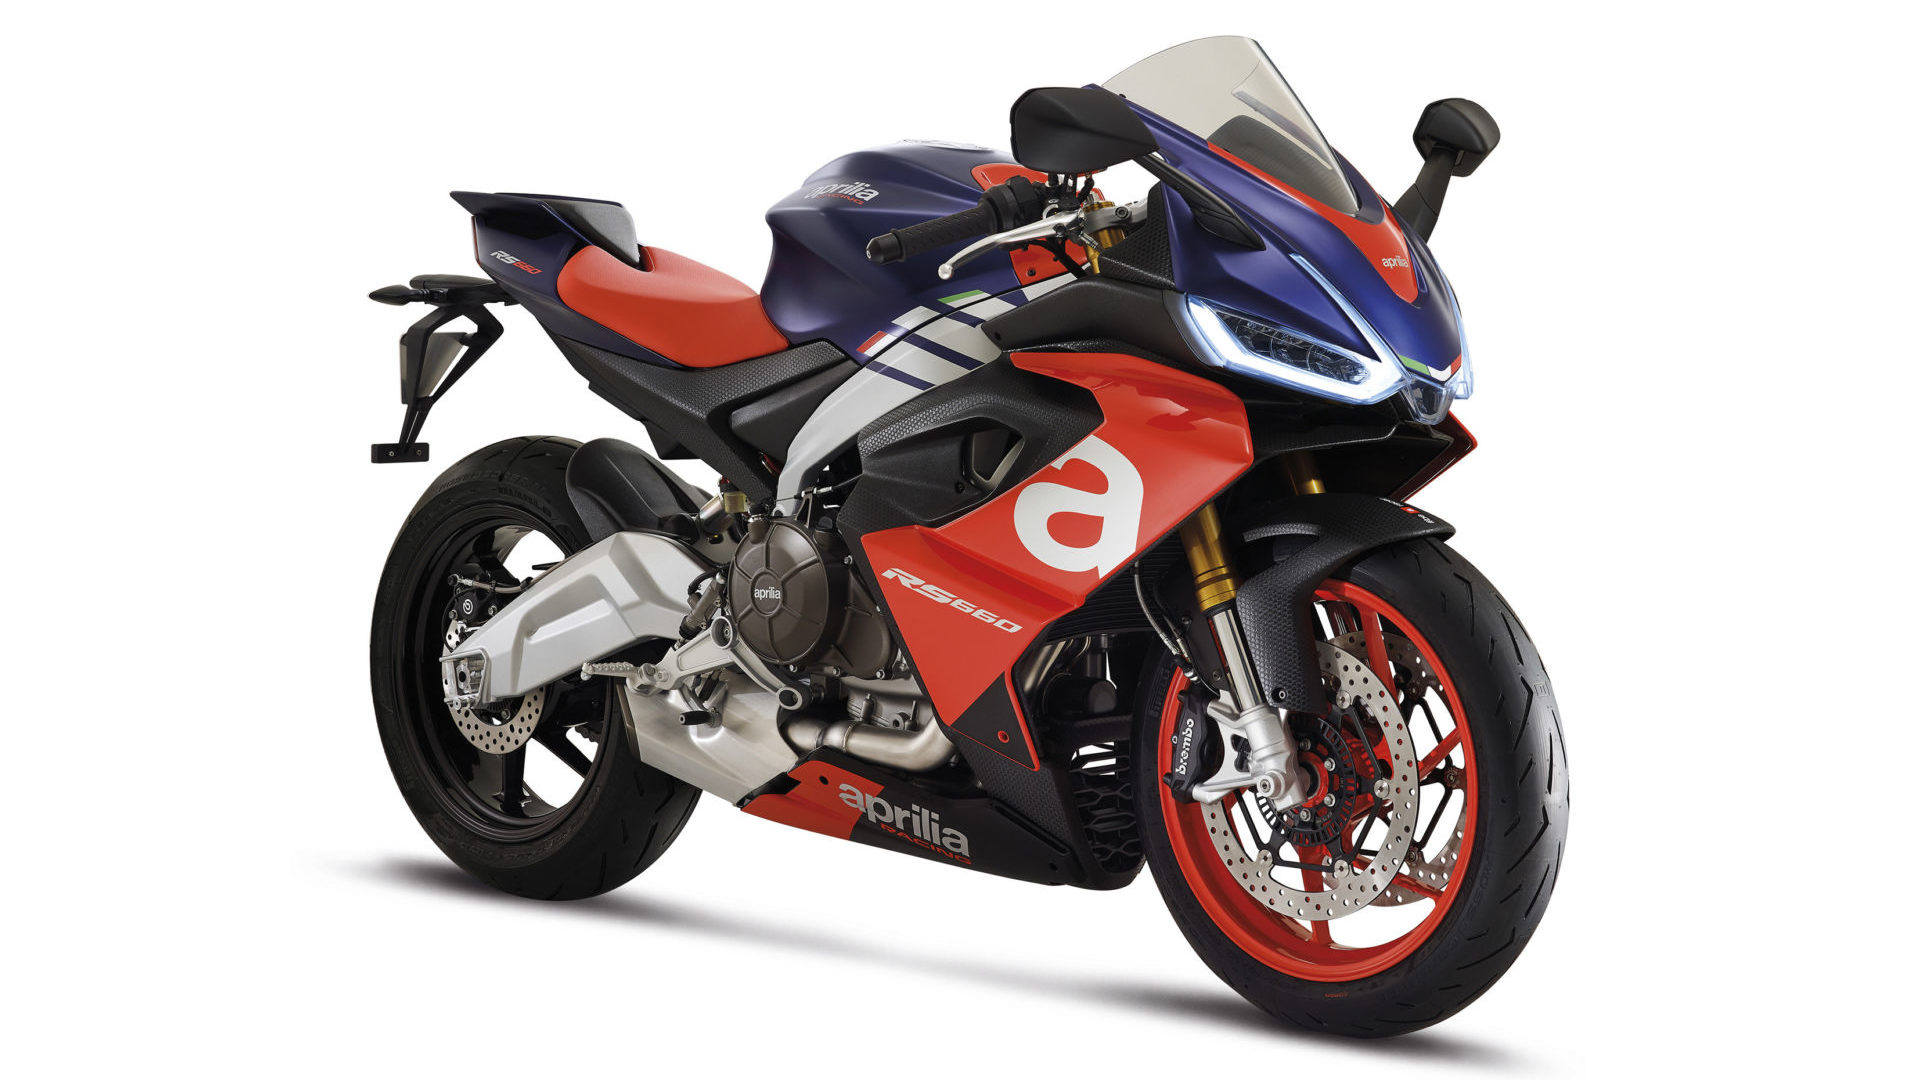 2020: Aprilia Introduces New RS 660 Twin-Cylinder Sportbike At EICMA